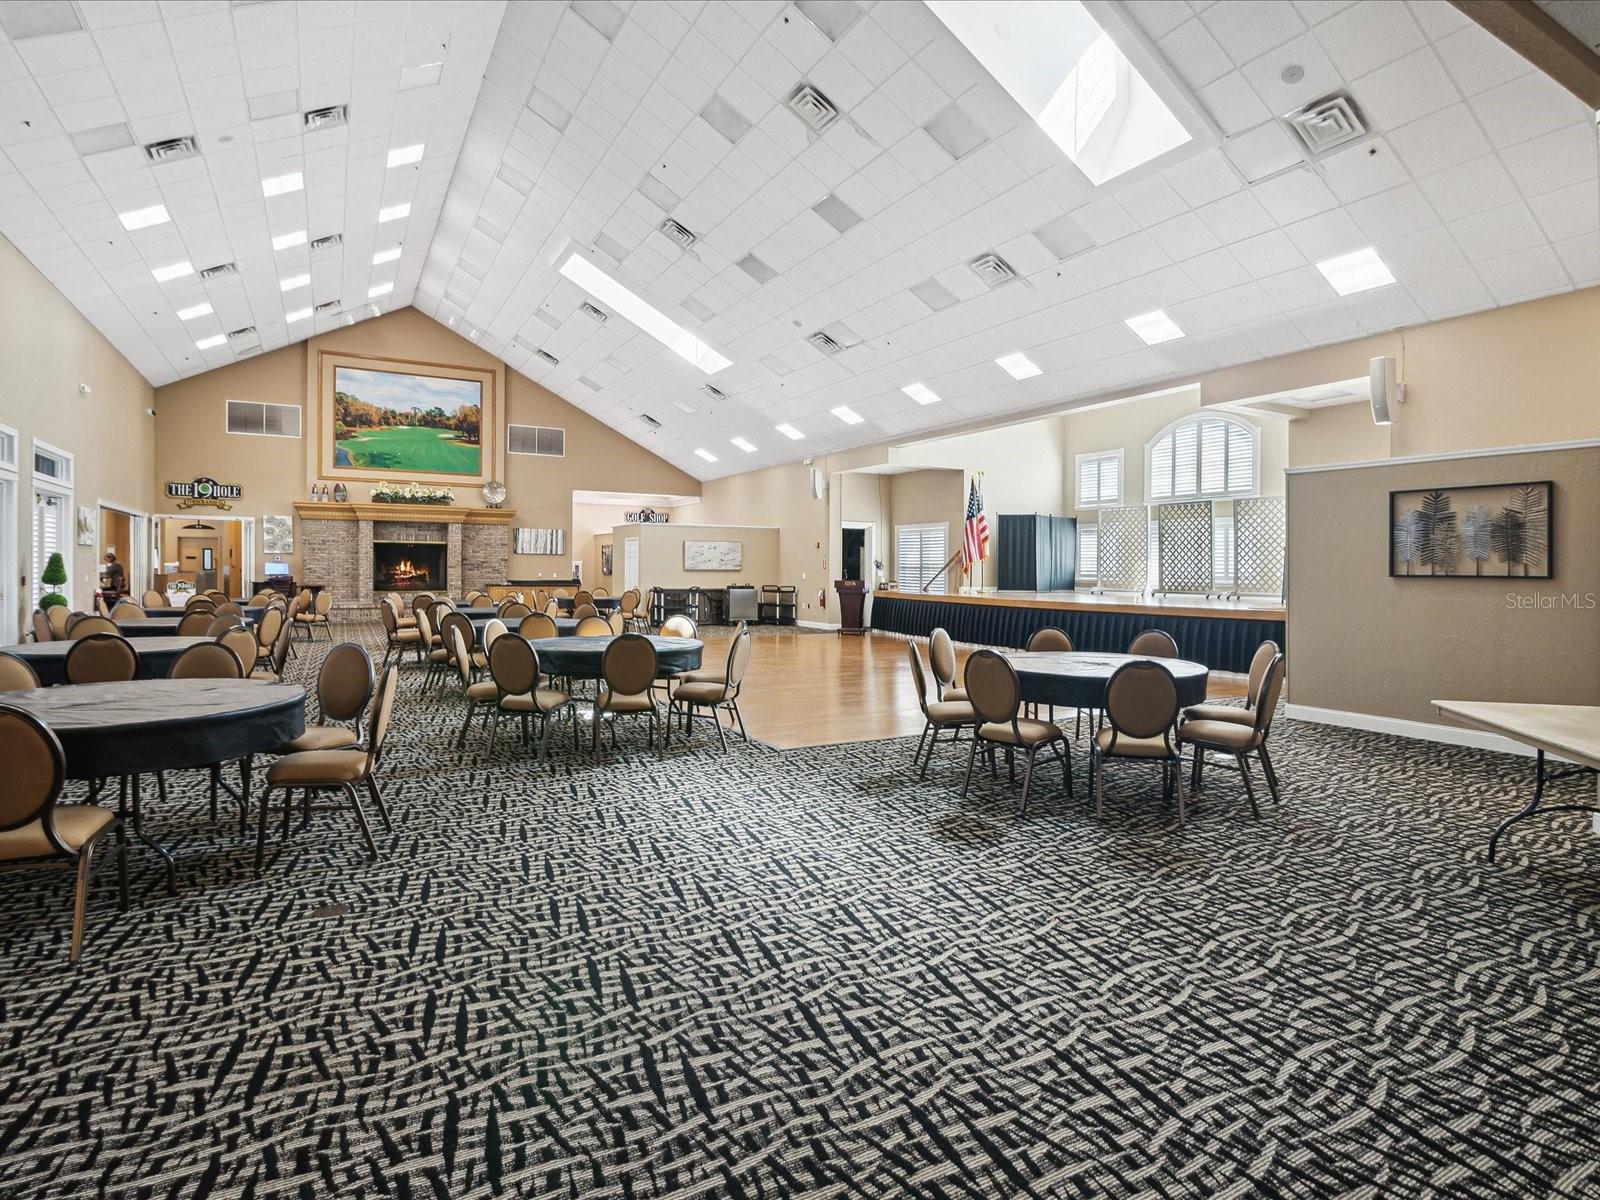 Timber Greens Clubhouse and dance floor